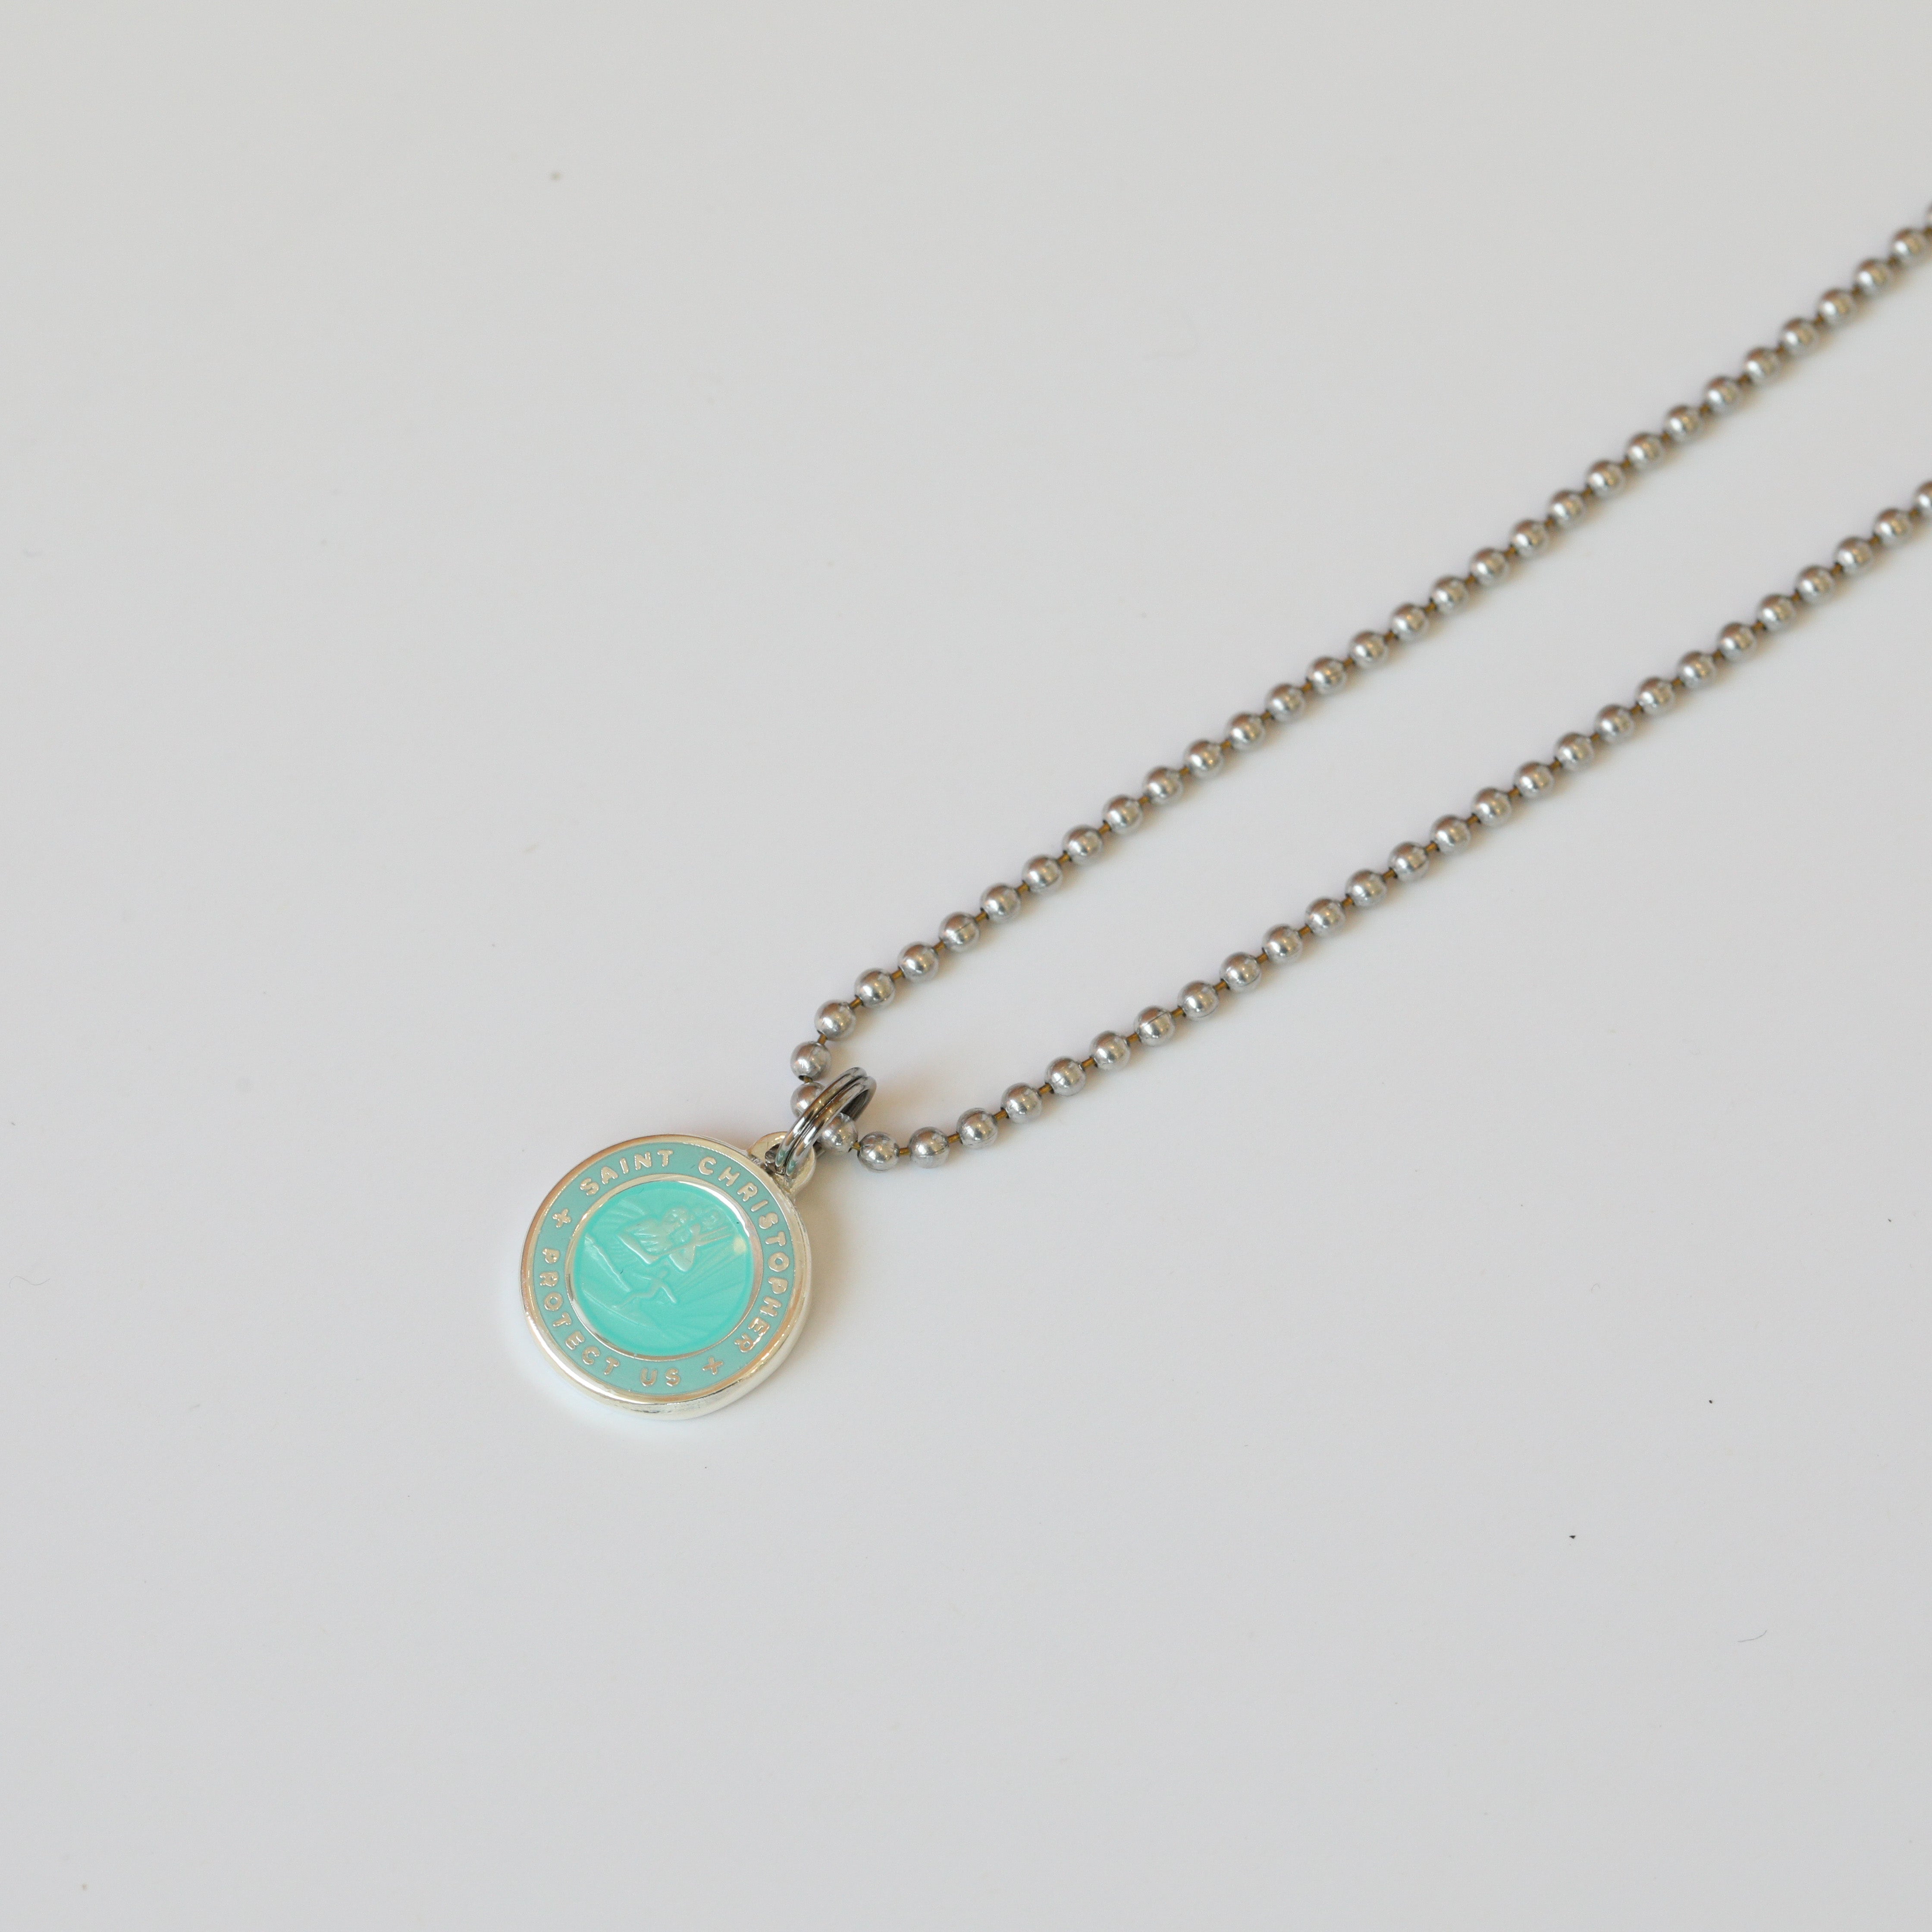 Small Teal Teal St. Christopher